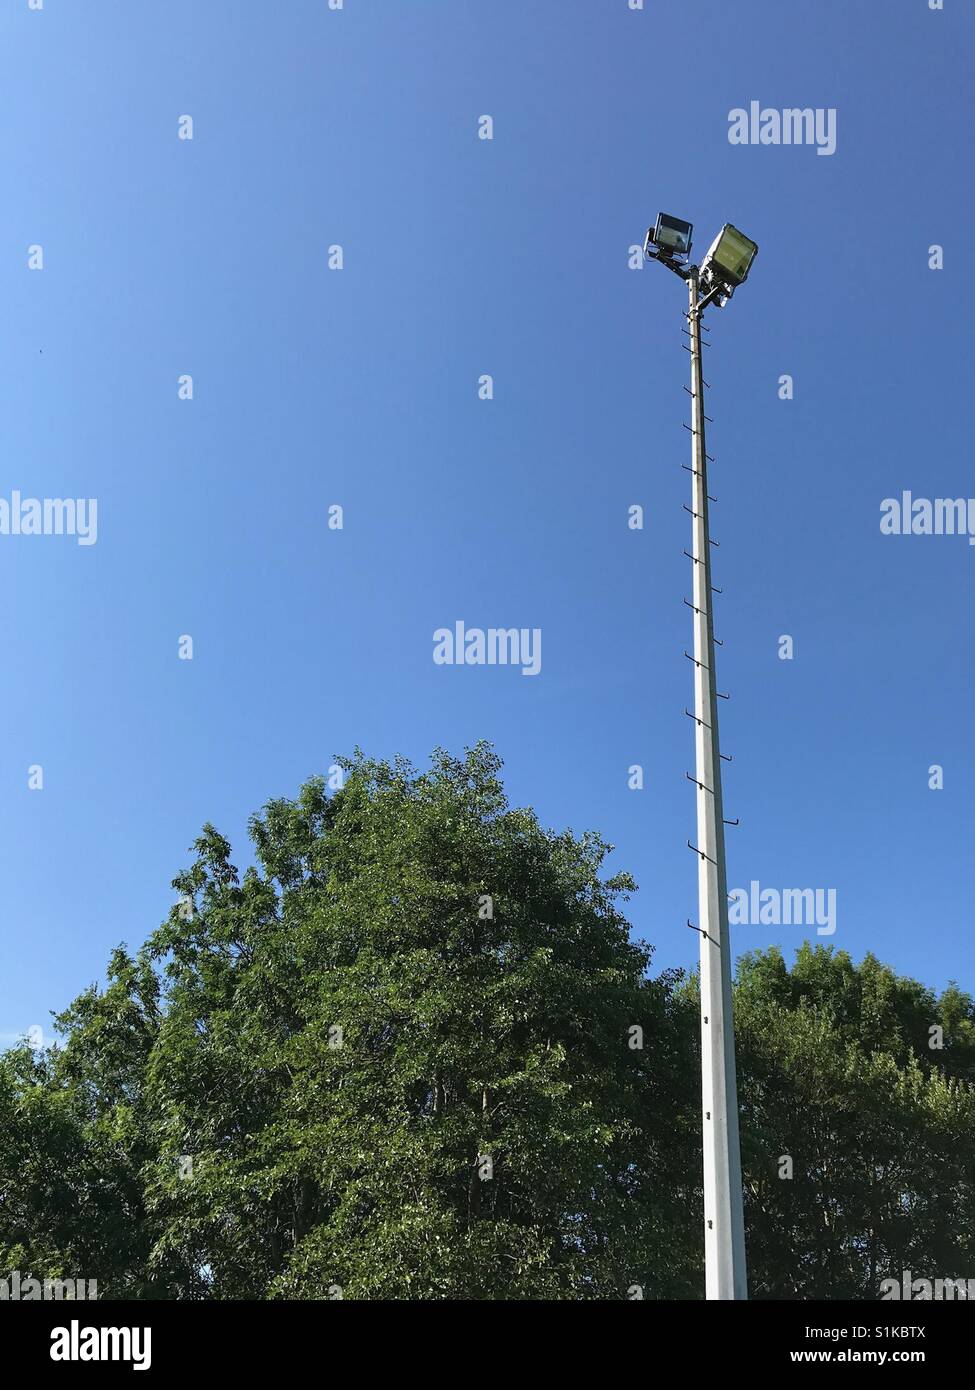 Floodlights on a sports pitch against a background of bright blue sky and trees (subject positioned to right) Stock Photo